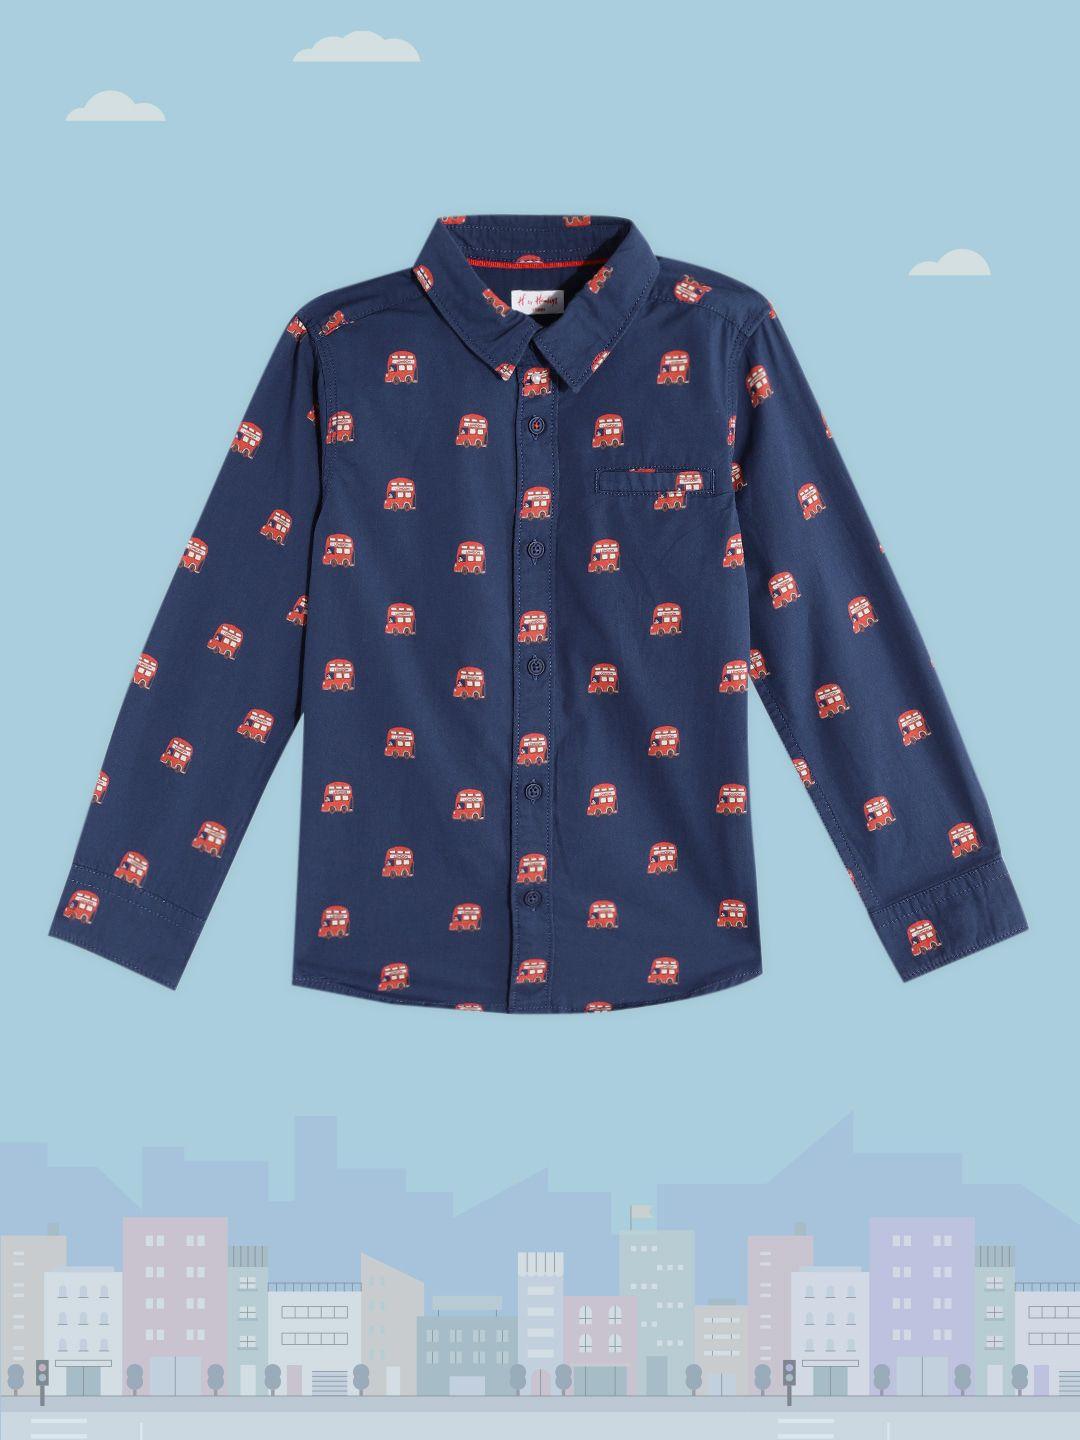 h by hamleys boys navy blue & red printed cotton casual shirt